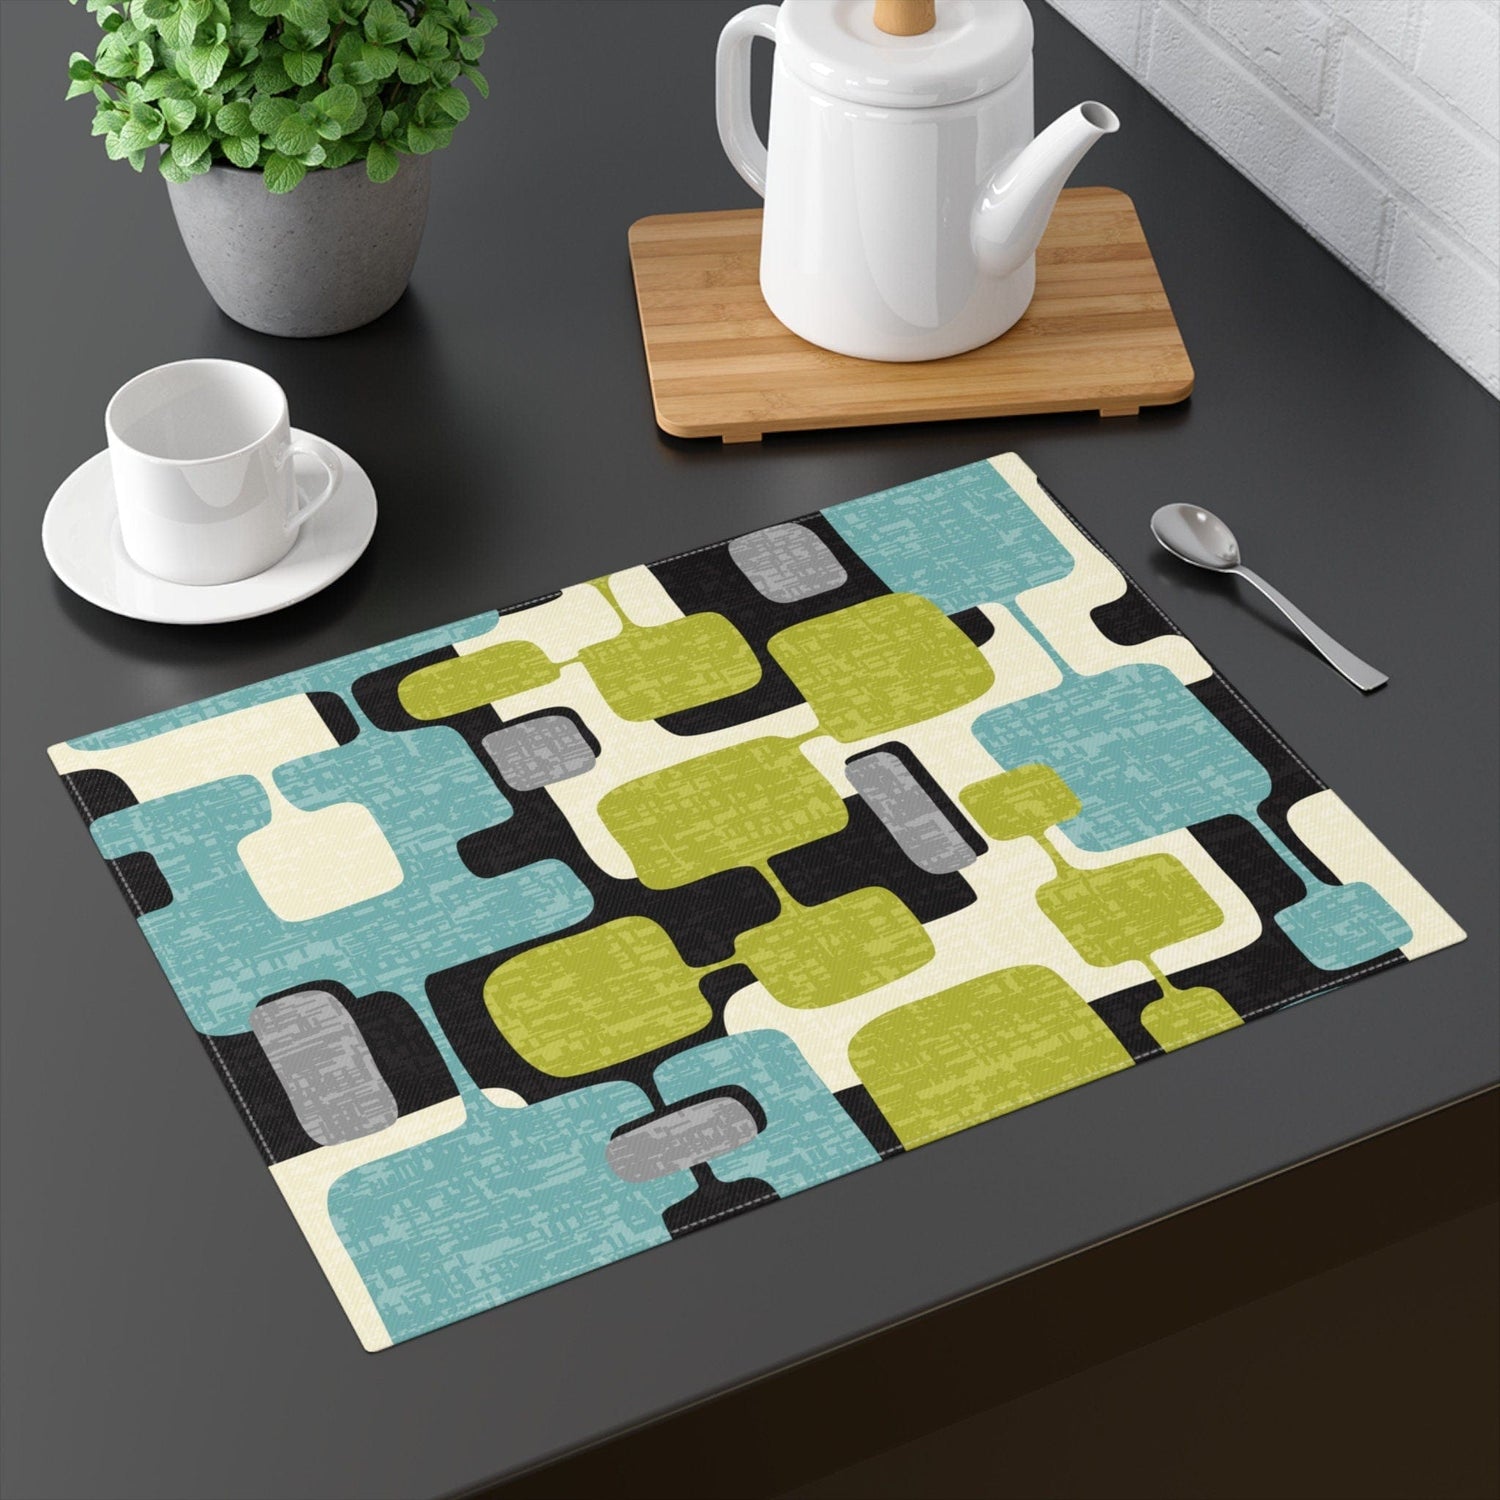 Kate McEnroe New York Mid Century Modern Geometric Abstract Placemats, Retro Teal, Lime Green, Gray, Black MCM Table LinensPlacemats11614579044325381528